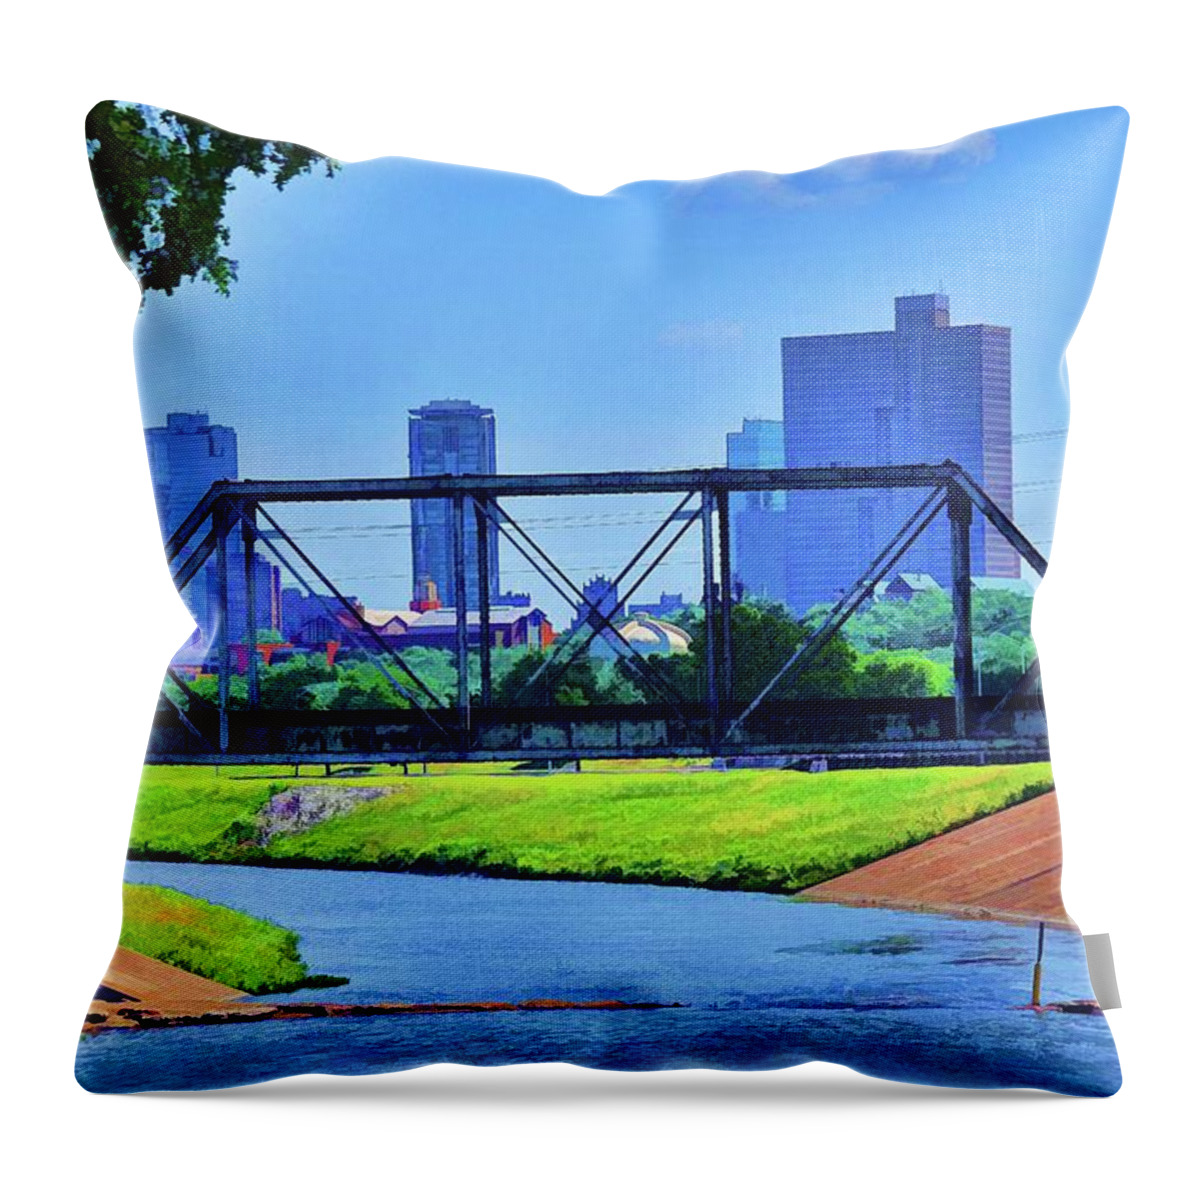 Fort Worth Throw Pillow featuring the photograph Fort Worth Texas Skyline by Diana Mary Sharpton